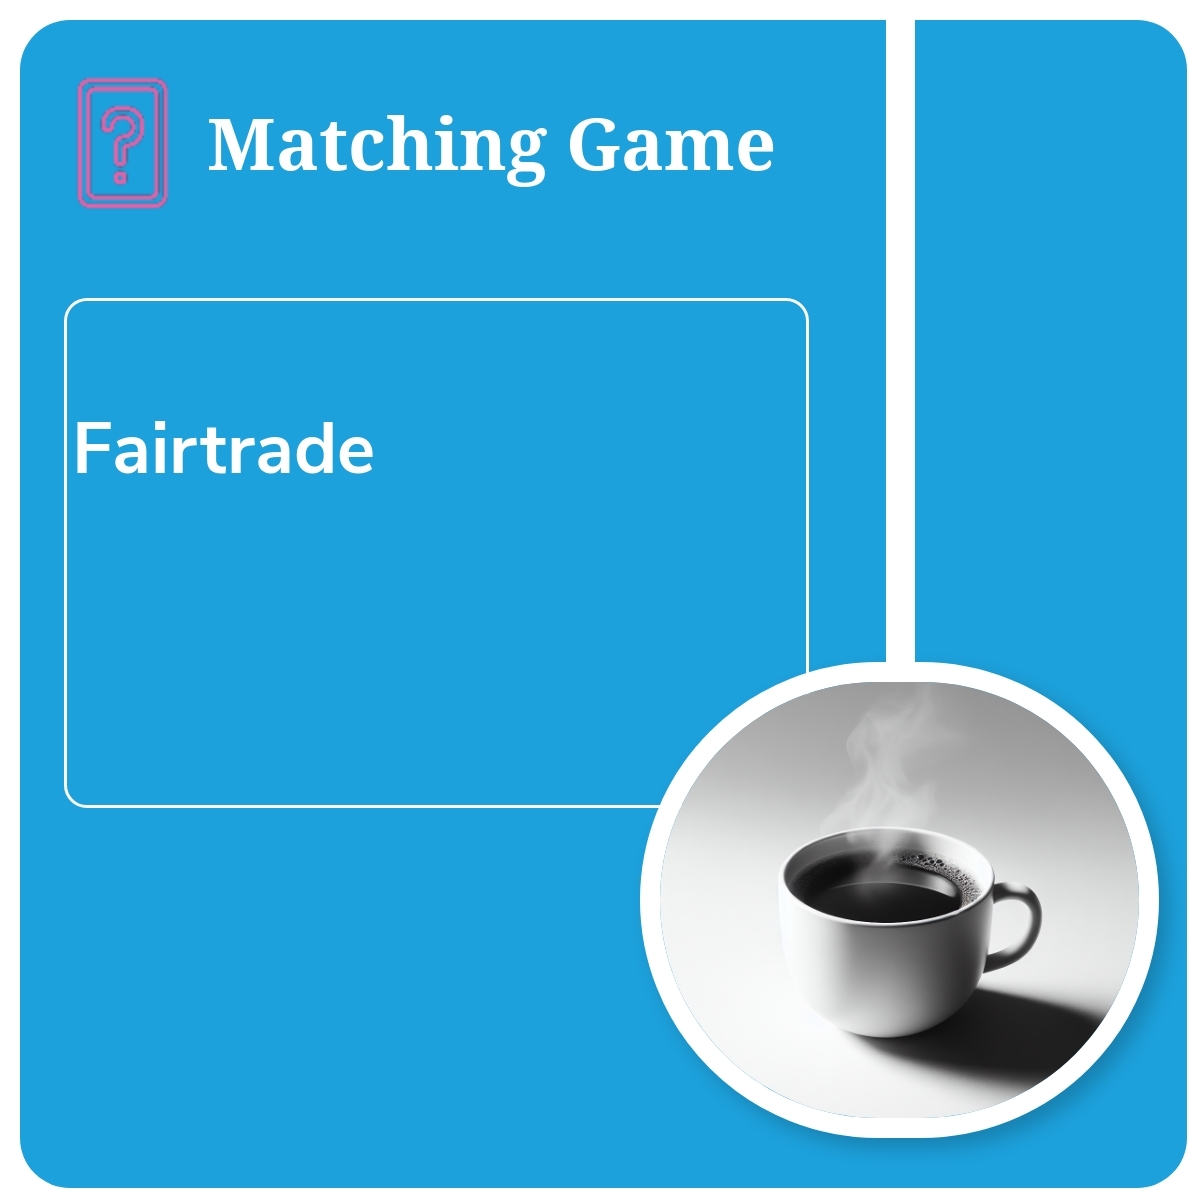 Matching Words to Pictures (English): Fairtrade